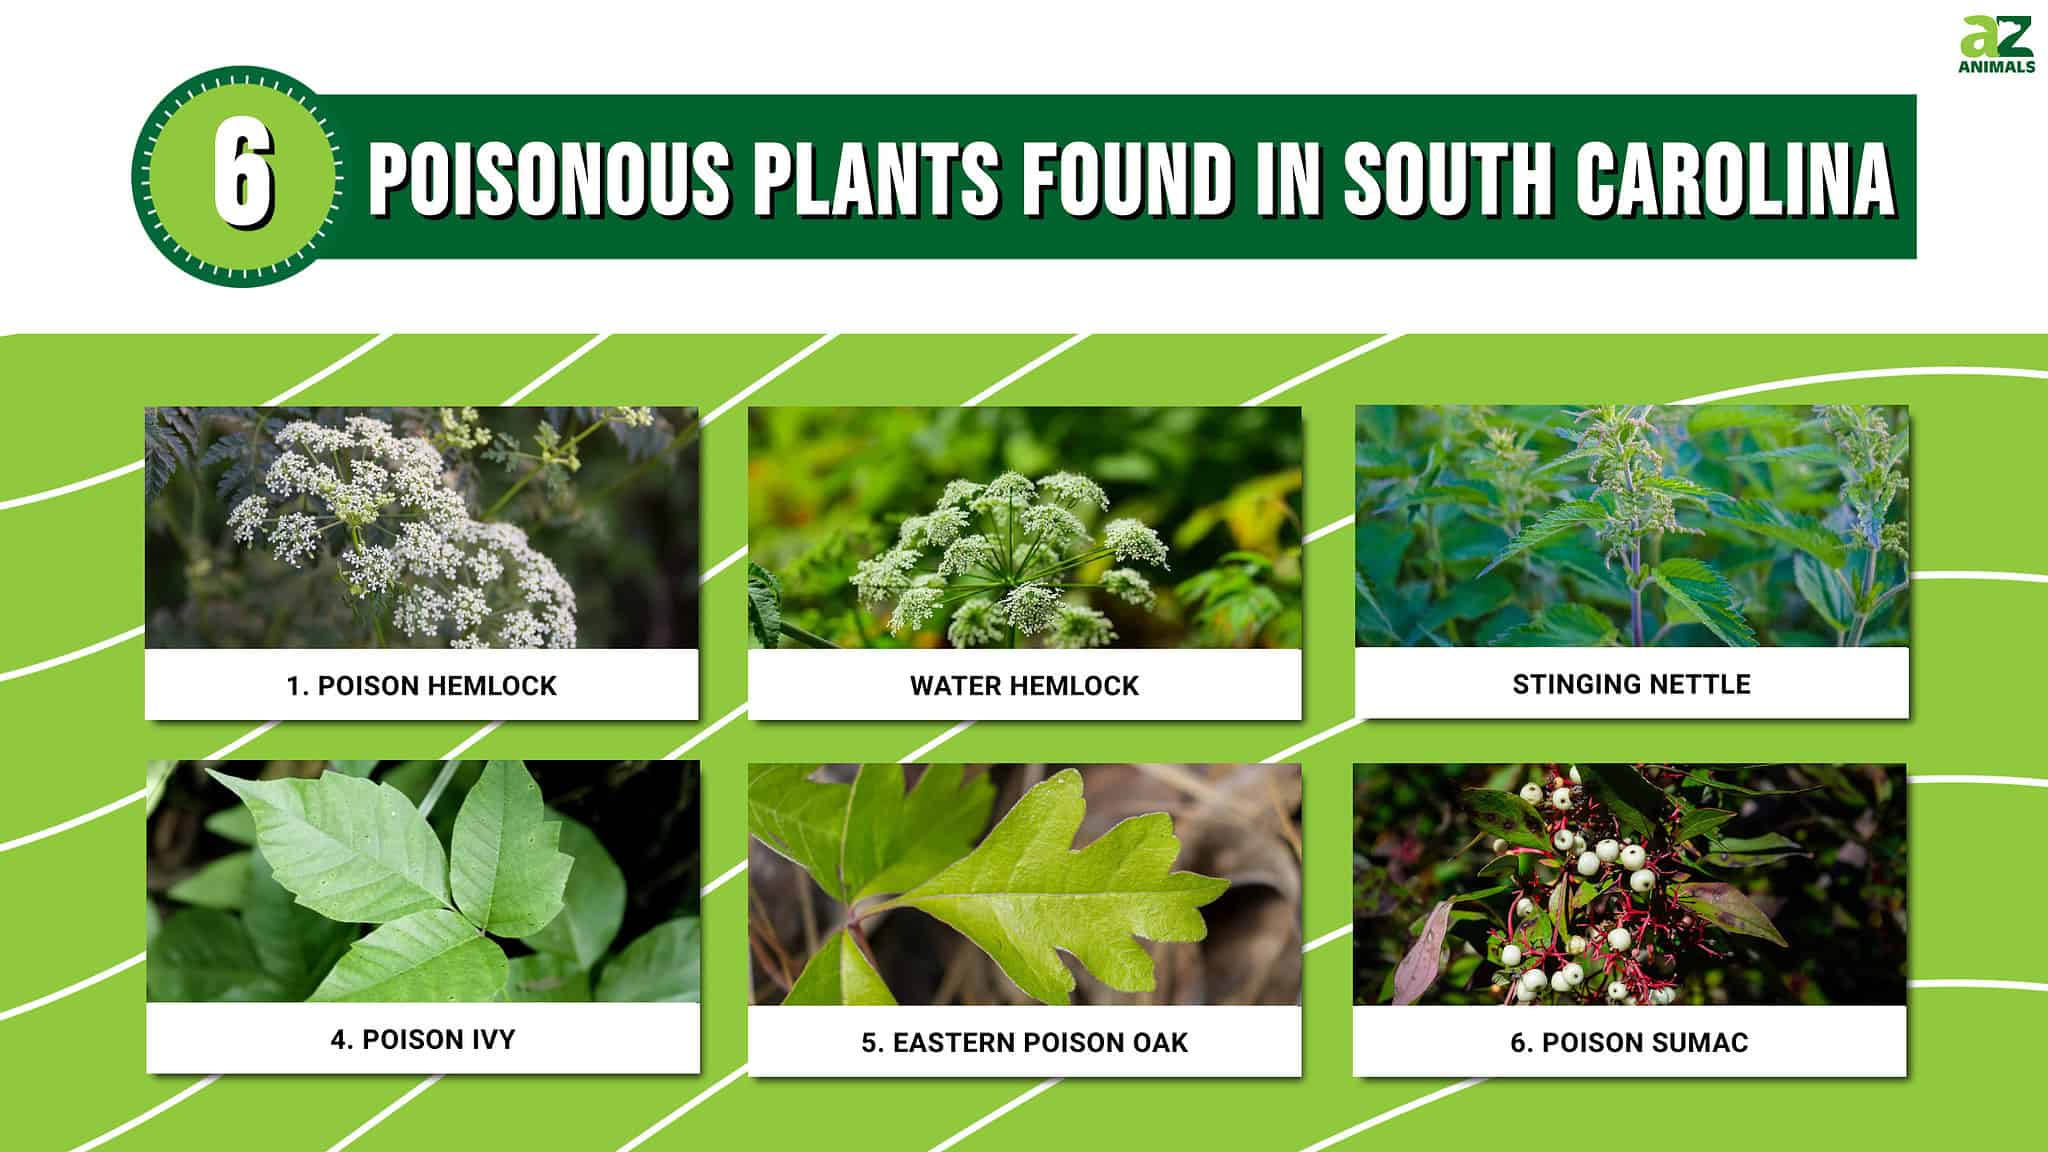 These 6 Poisonous Plants Found in South Carolina Are Very Dangerous - A ...